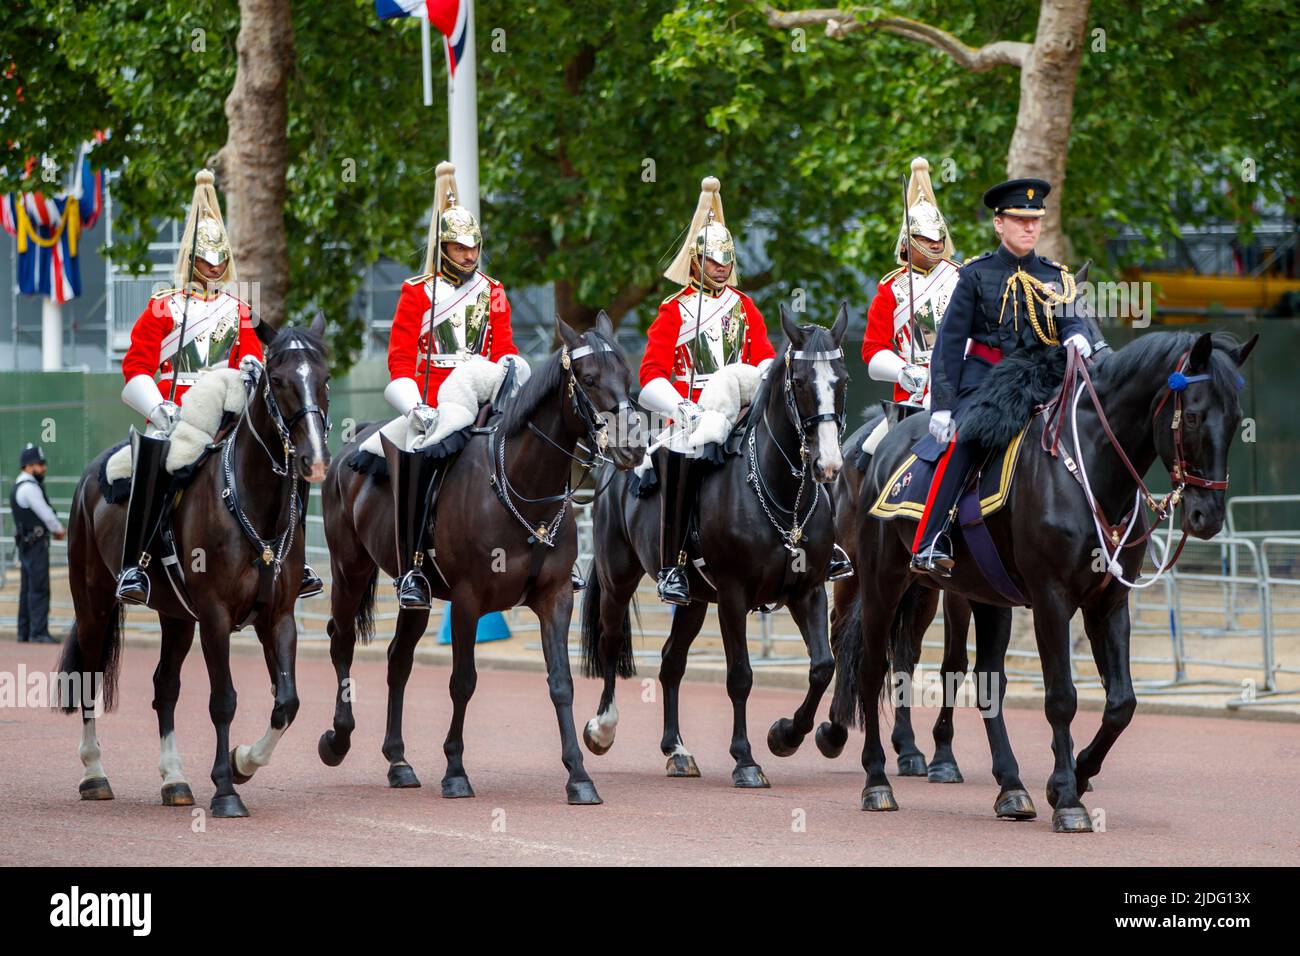 Oberstleutnant J Shaw und Rettungsschwimmer bei den Trooping the Color Probesals, The Mall, London England, Samstag, 21. Mai, 2022. Stockfoto